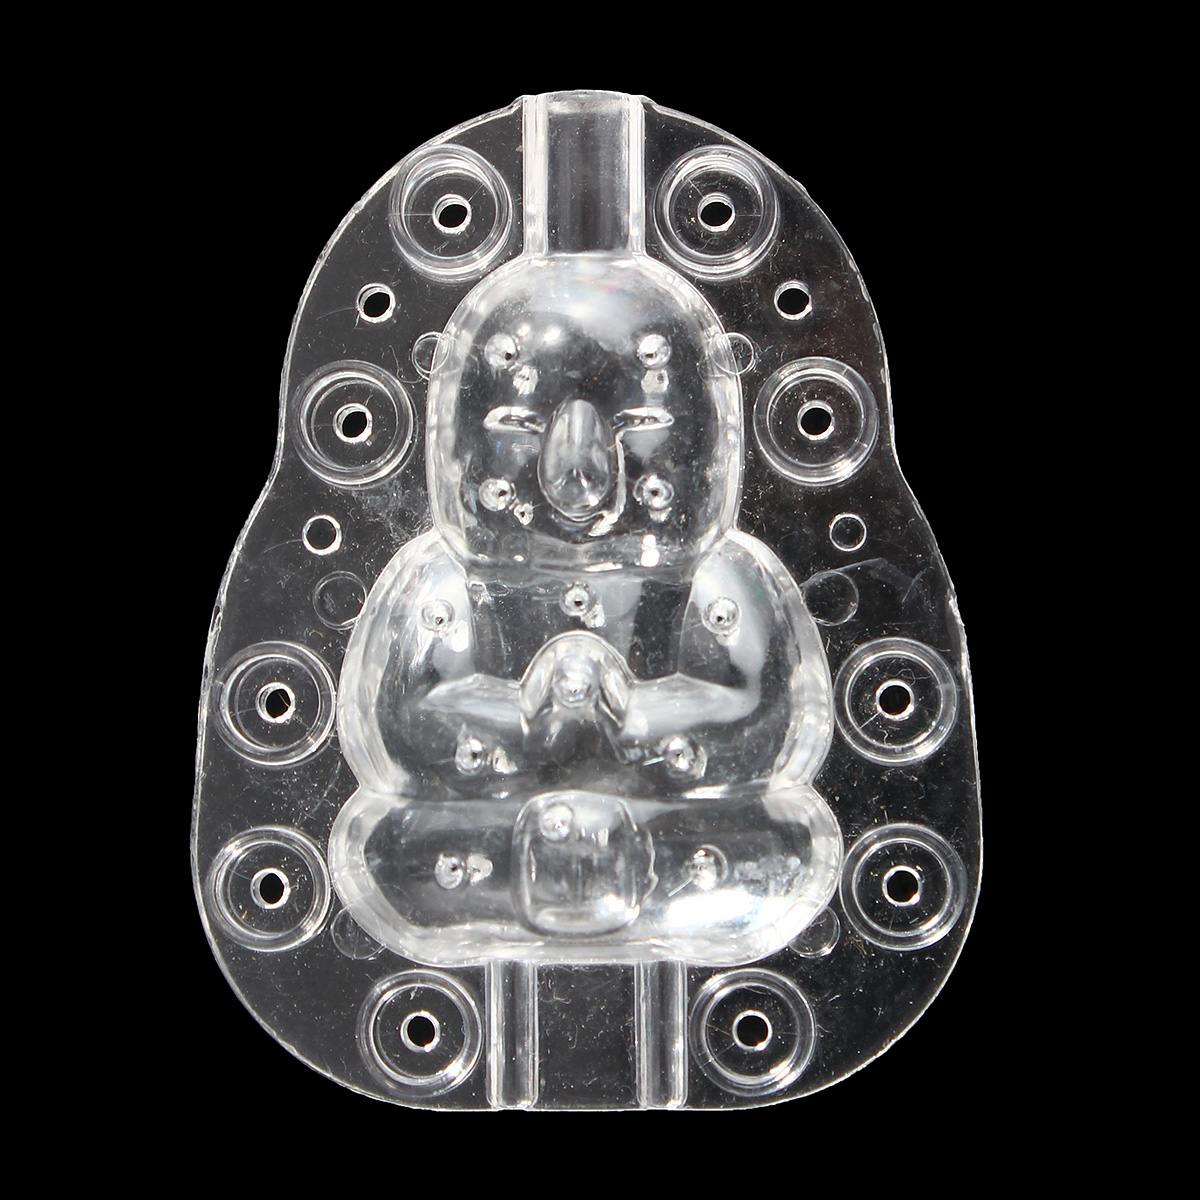 Buddha-shaped Garden Fruits Pear Peach Growth Forming Mold Shaping Tool Plant Support Greenhouse Agriculture Tools